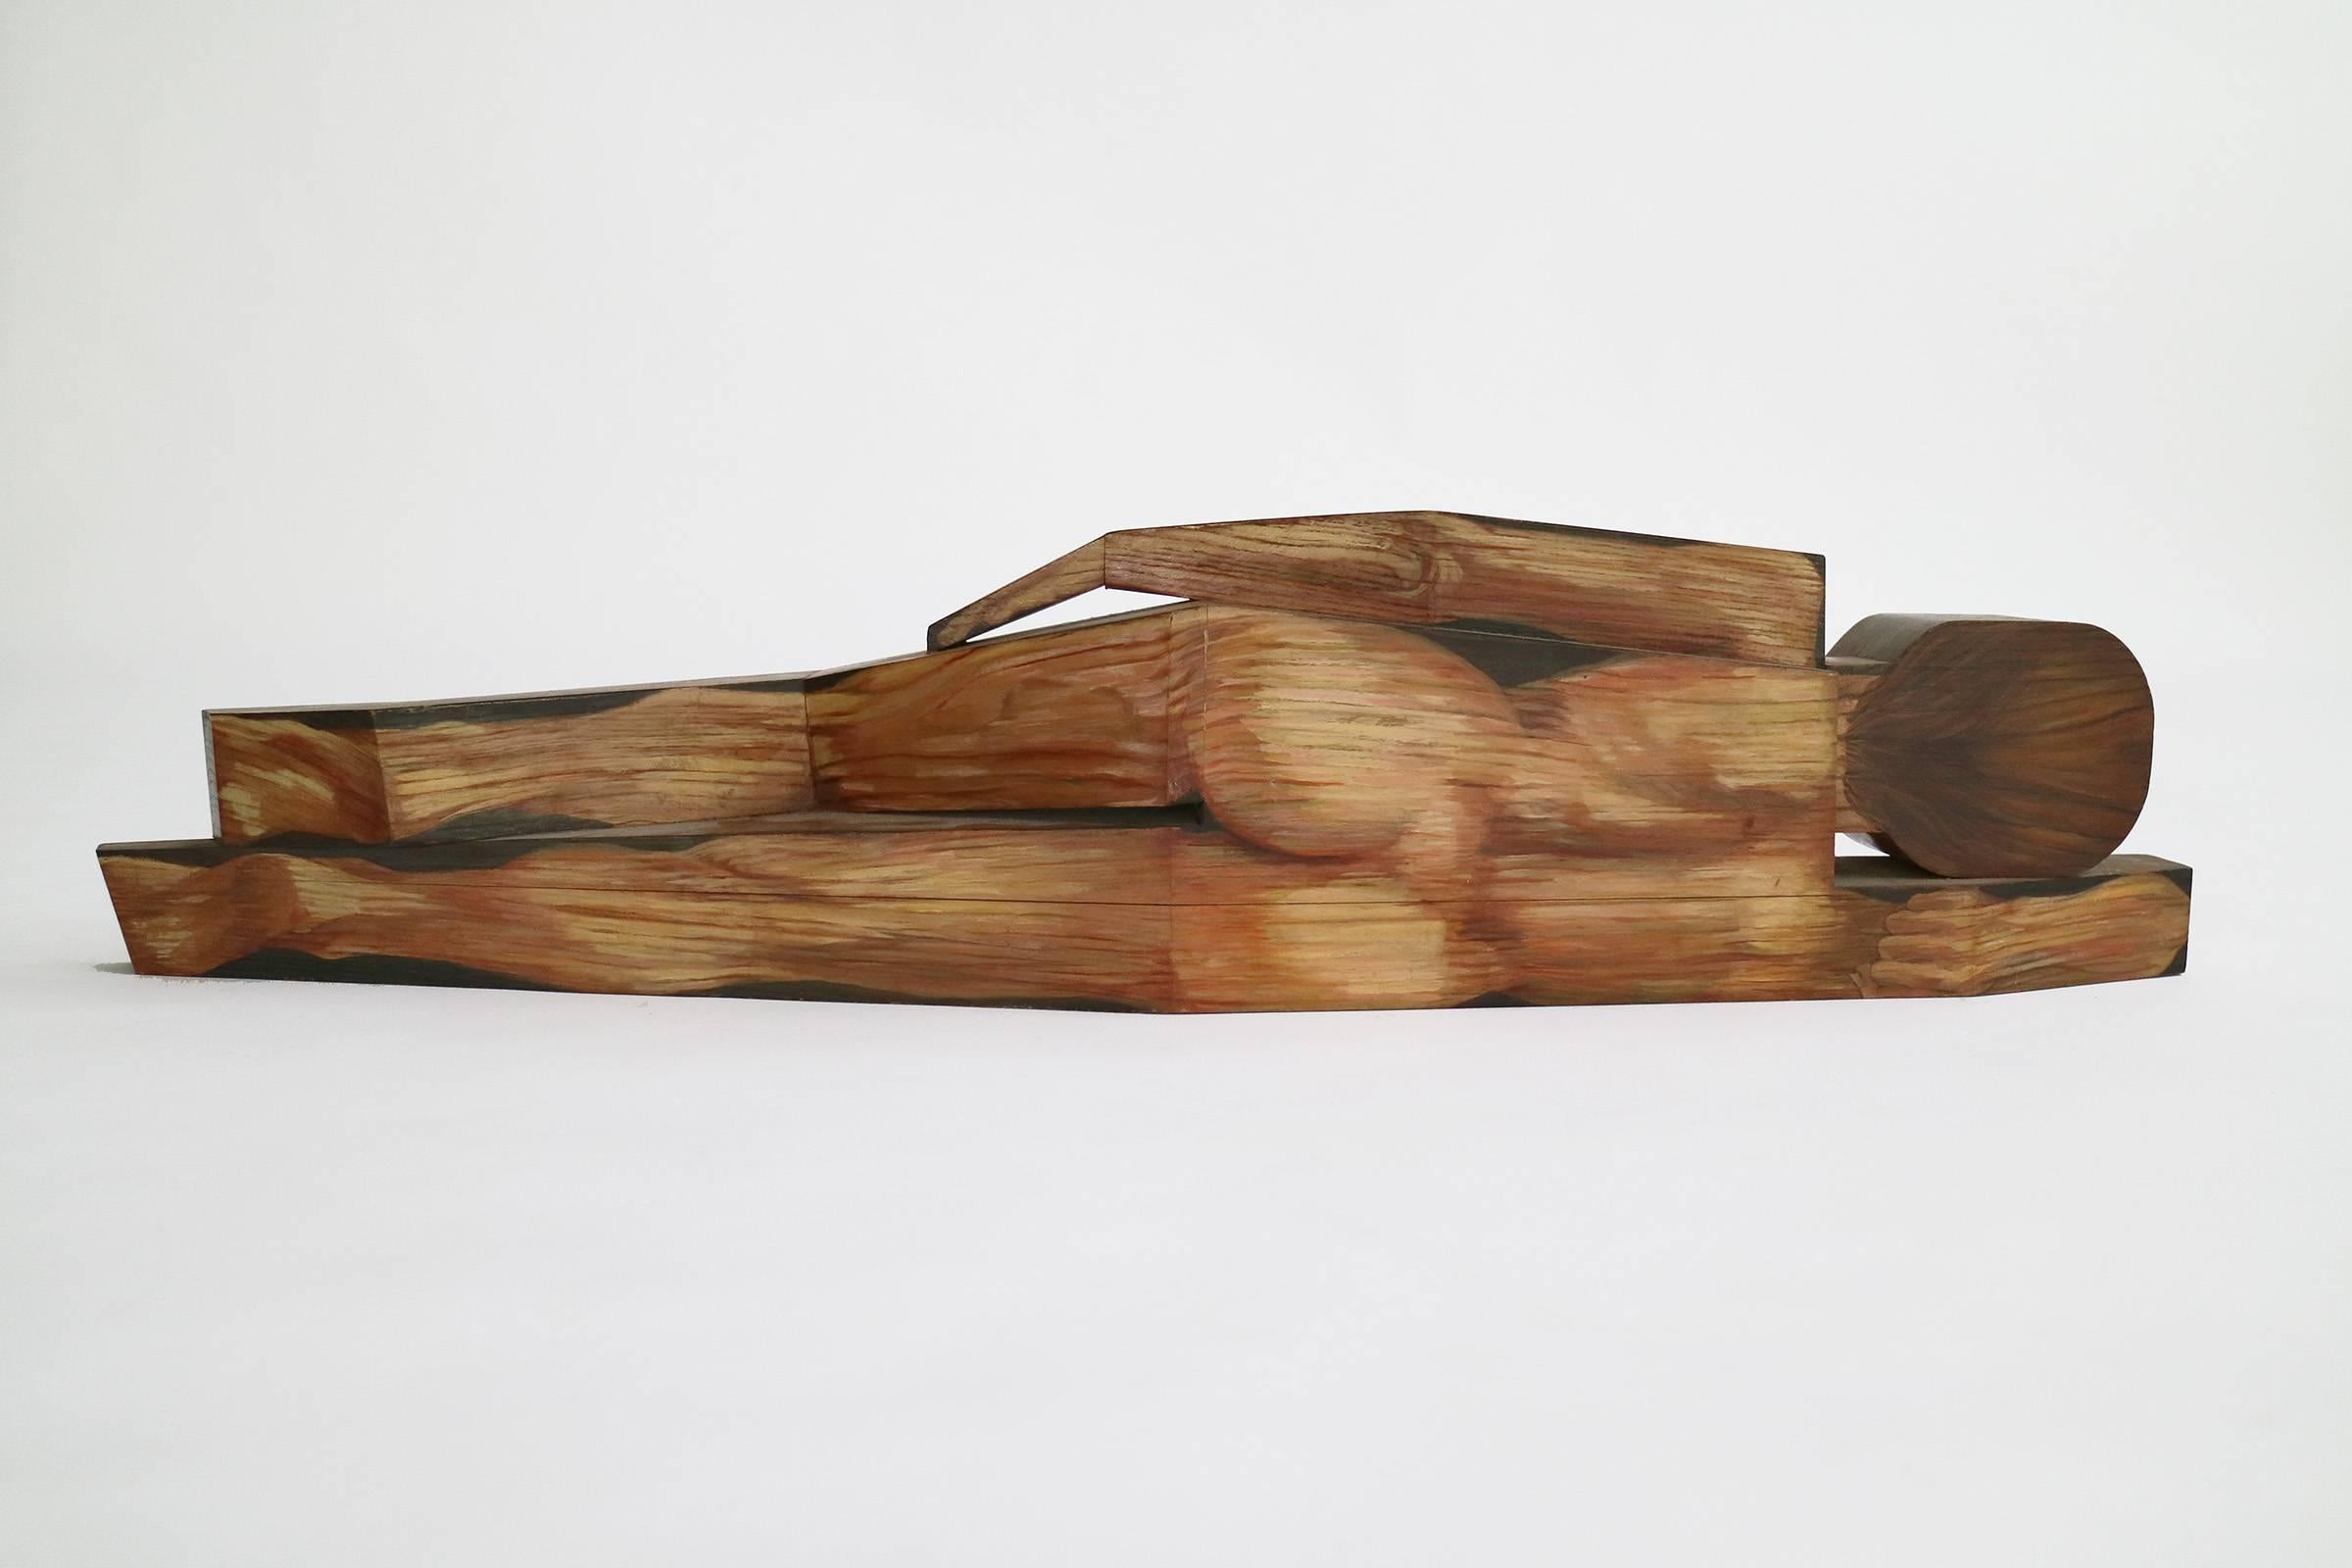 Carved and painted wood sculpture by Carol Quinn.

This item is currently on view in our NYC Greenwich Street Location.